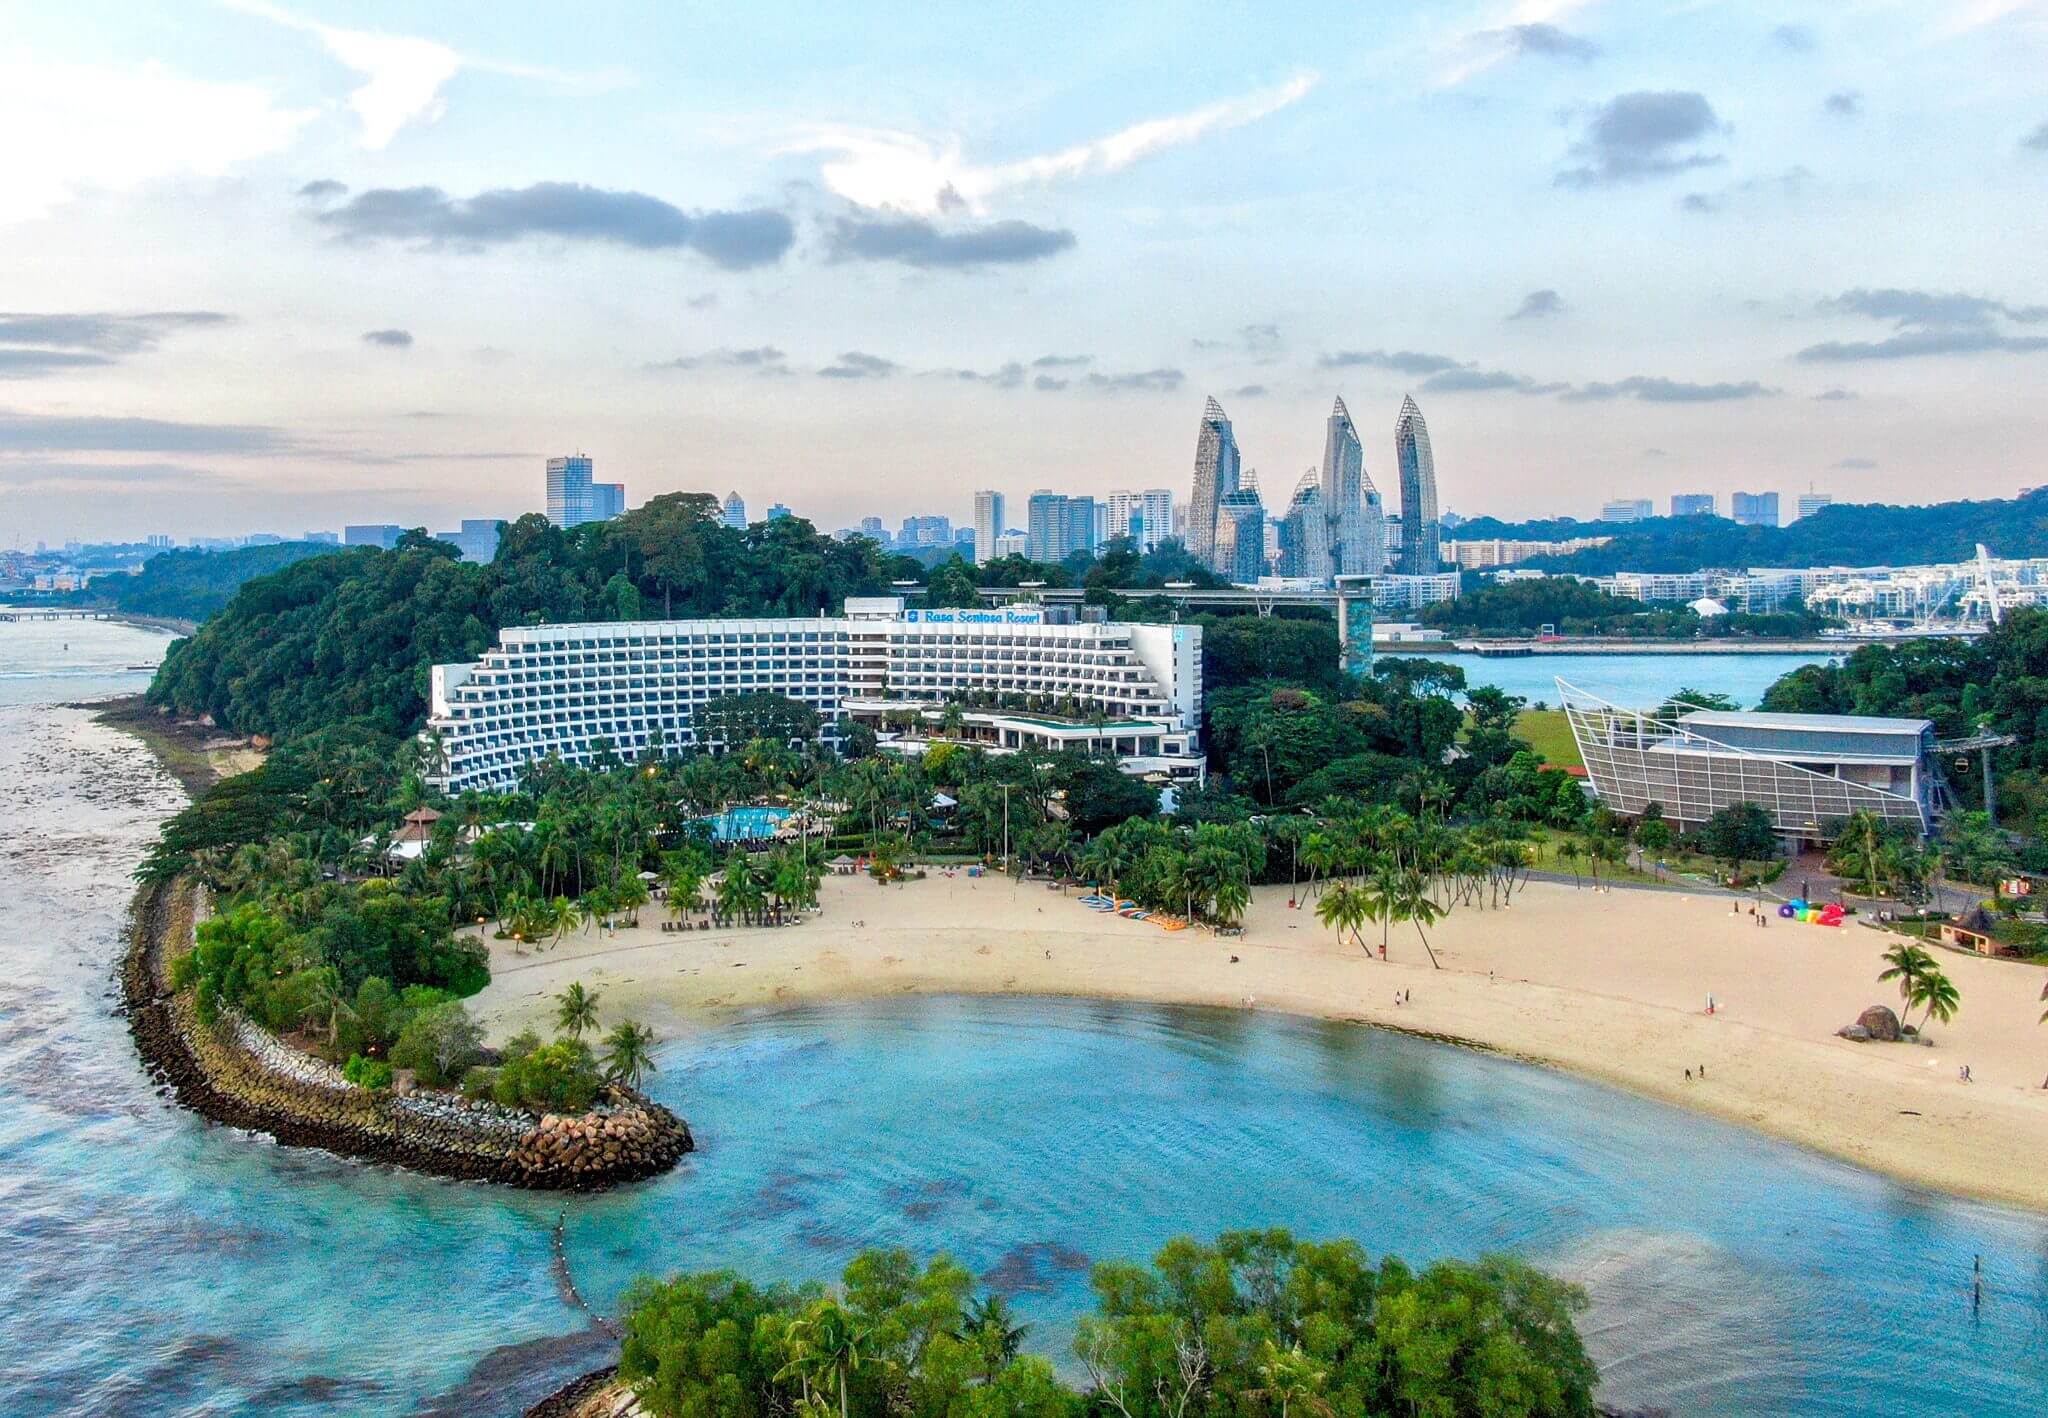 Image of the Shangri-La from above with the private beach and singapore city buidings in the background